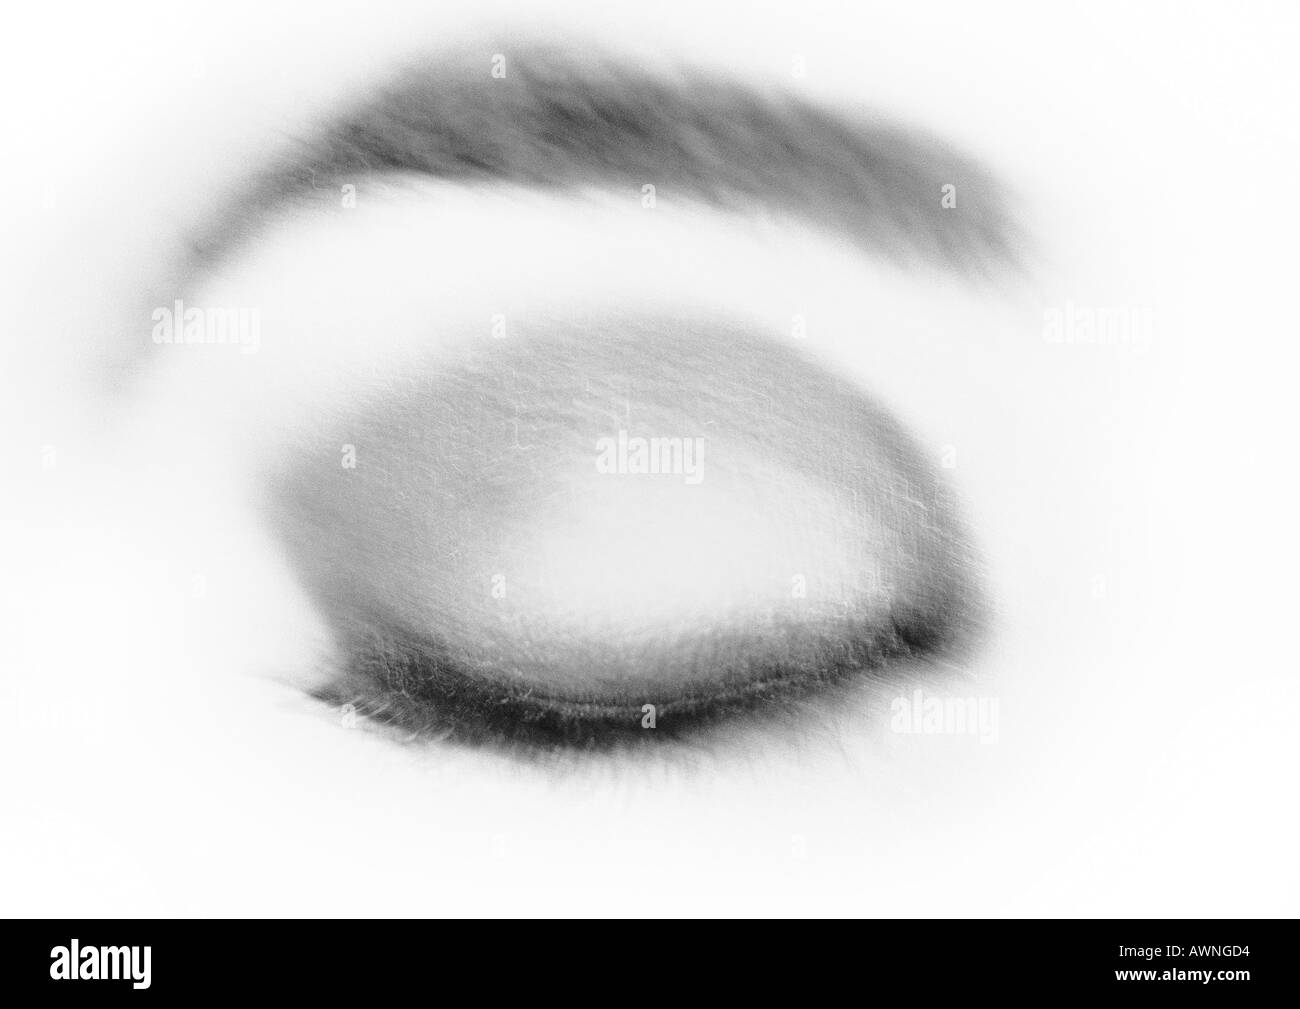 Woman's closed, made-up eye, close-up, black and white. Stock Photo